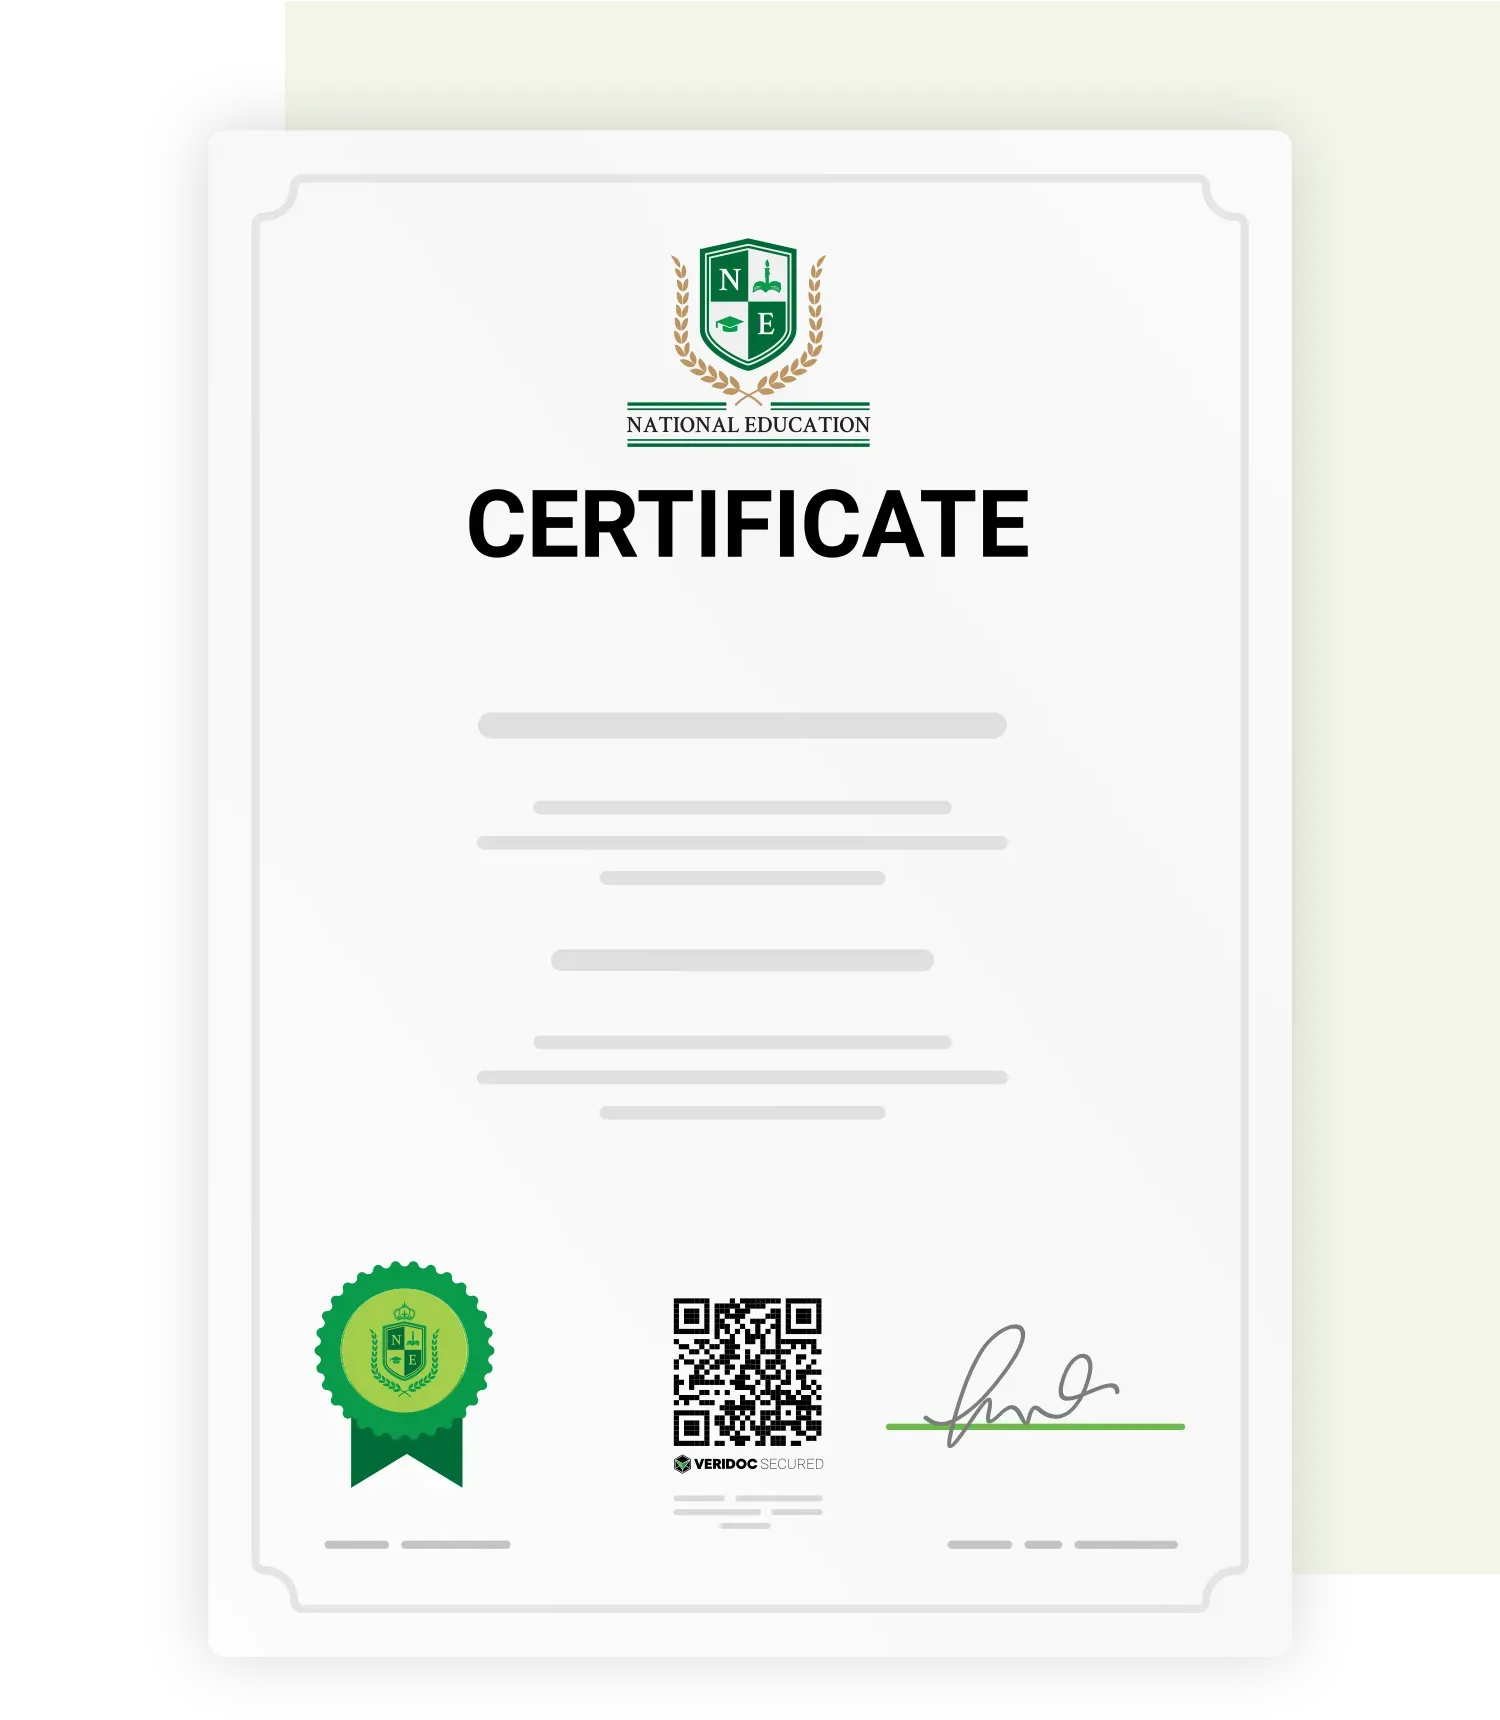 Storing And Verifying Certificates Made Easiar With Veridoc Certificates Veridoc Certificates 5500